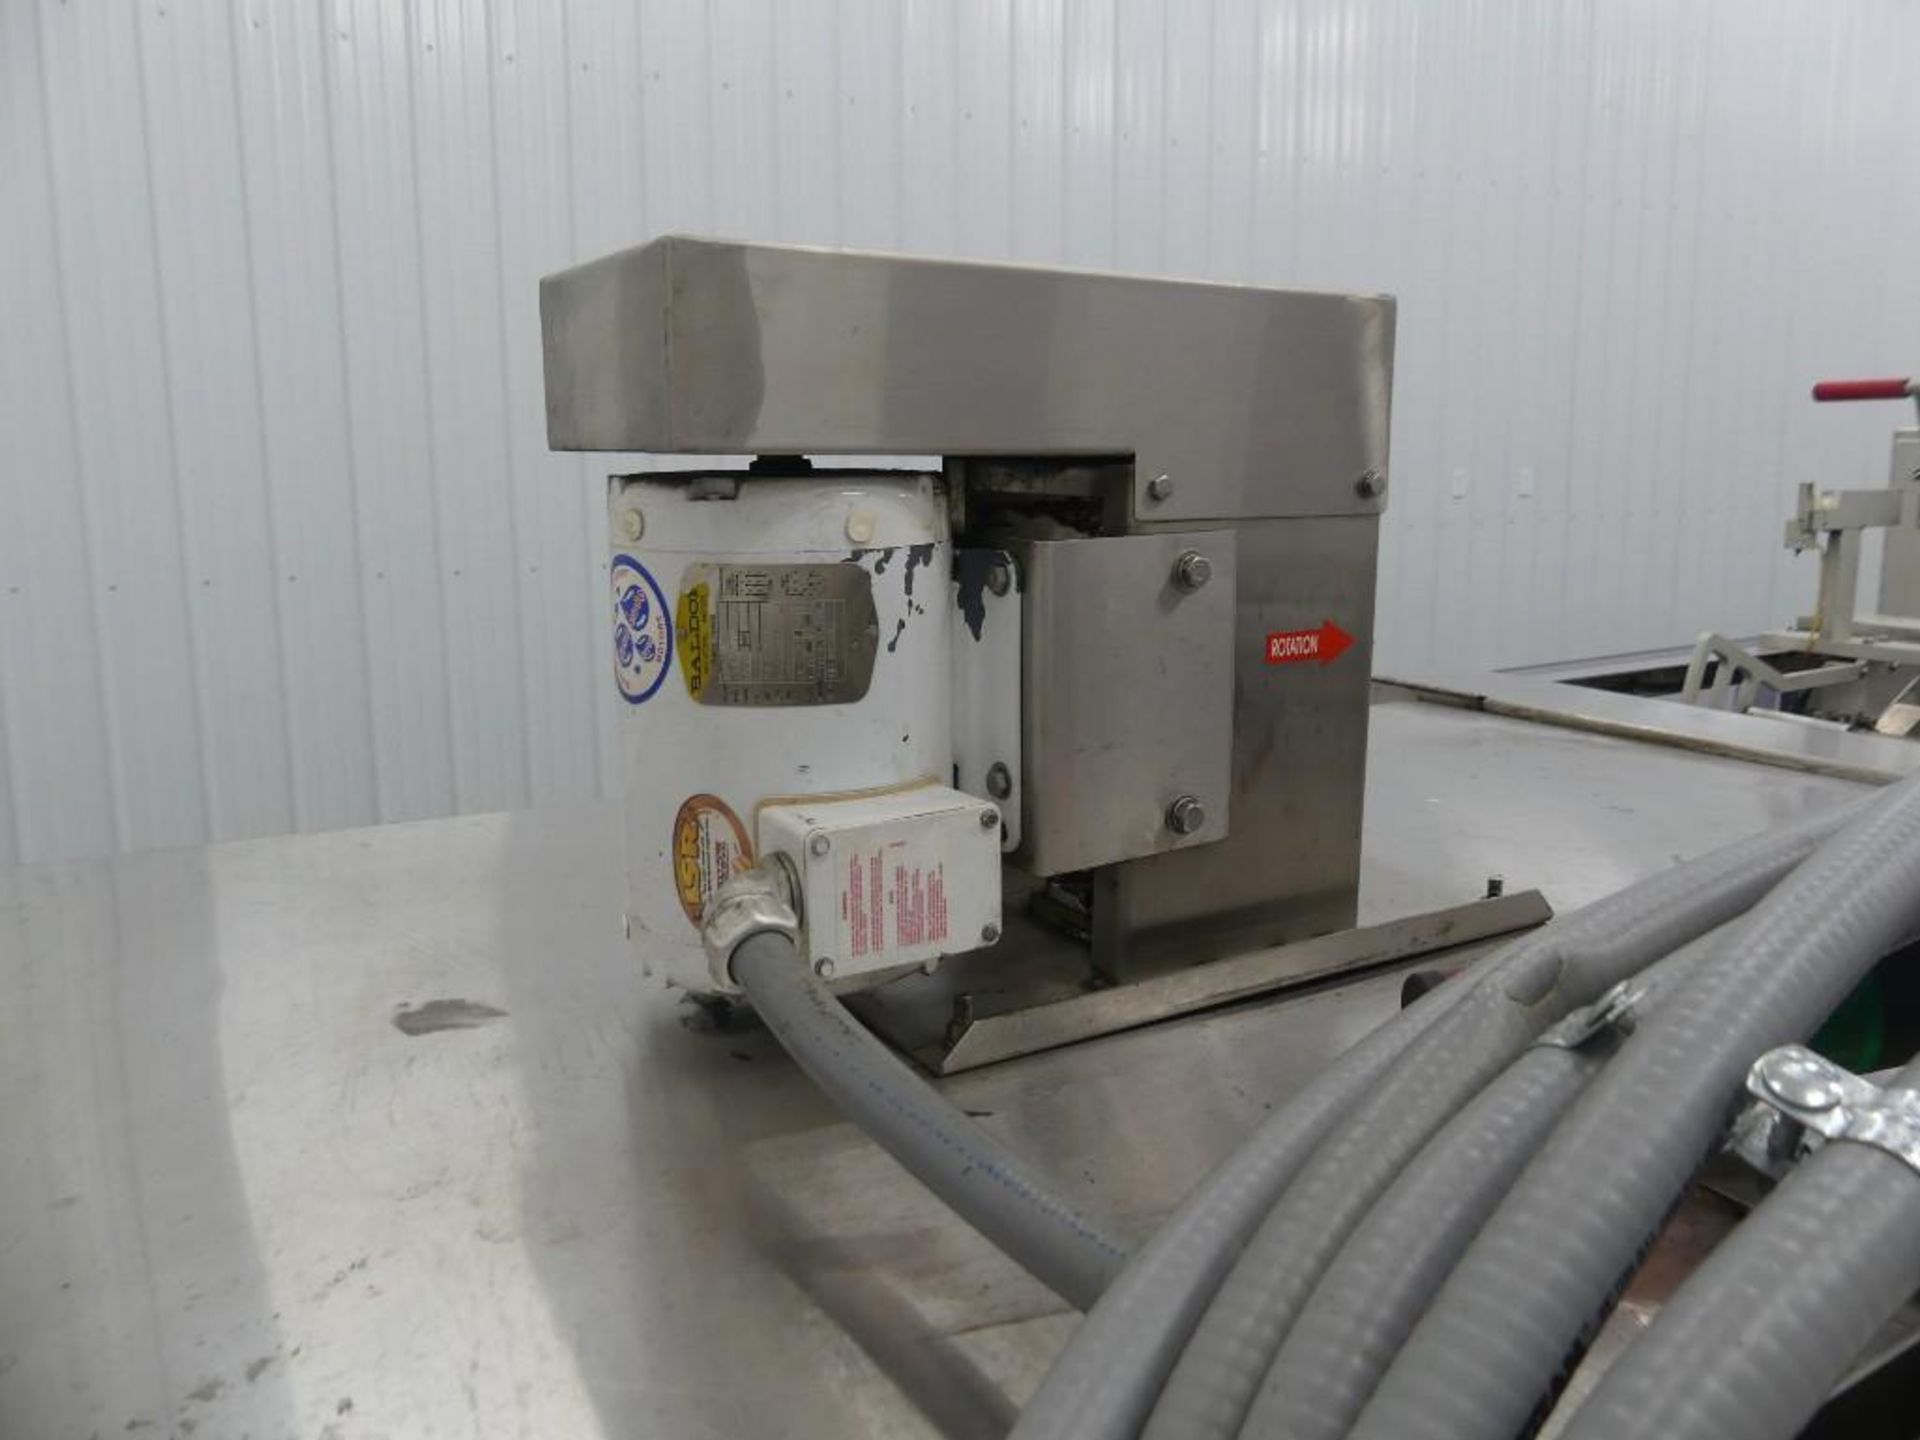 Delcor Spot-Pak 112-SS-24 Automatic Stainless Steel Shrink Bundler with Pick and Place - Image 43 of 78